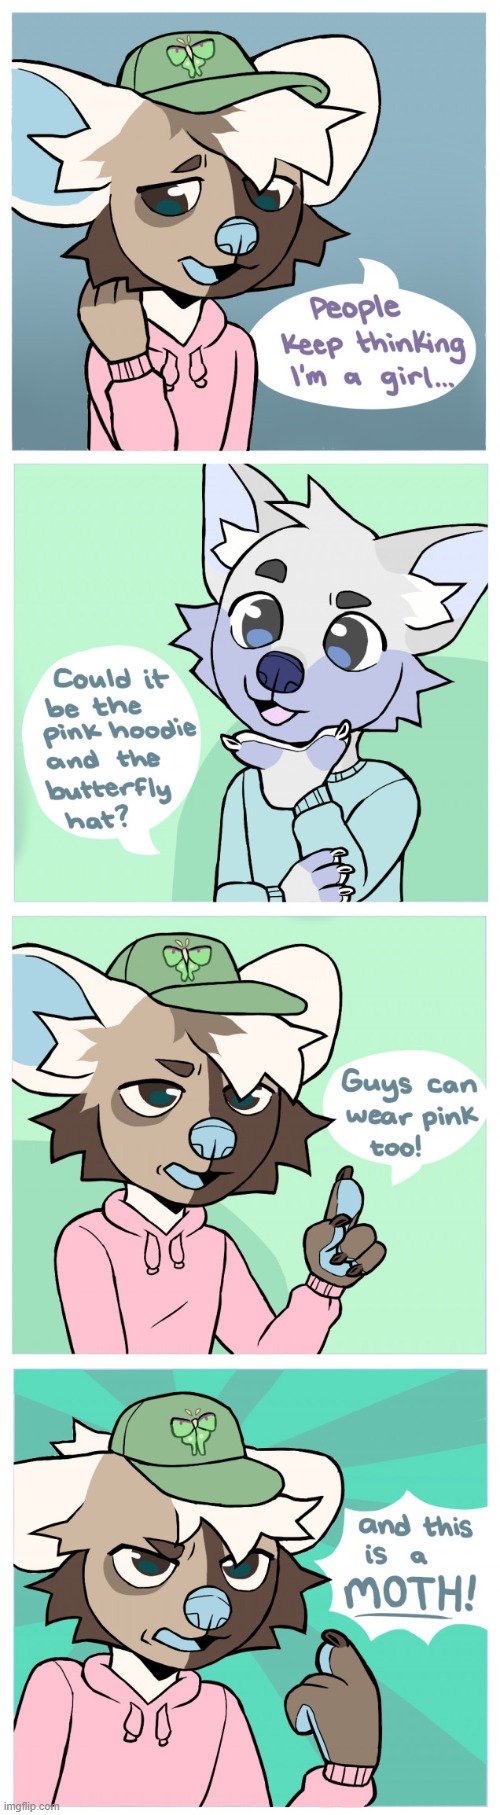 Amen (By spareferret) | image tagged in furry,memes,funny,moving hearts,cute,comics/cartoons | made w/ Imgflip meme maker